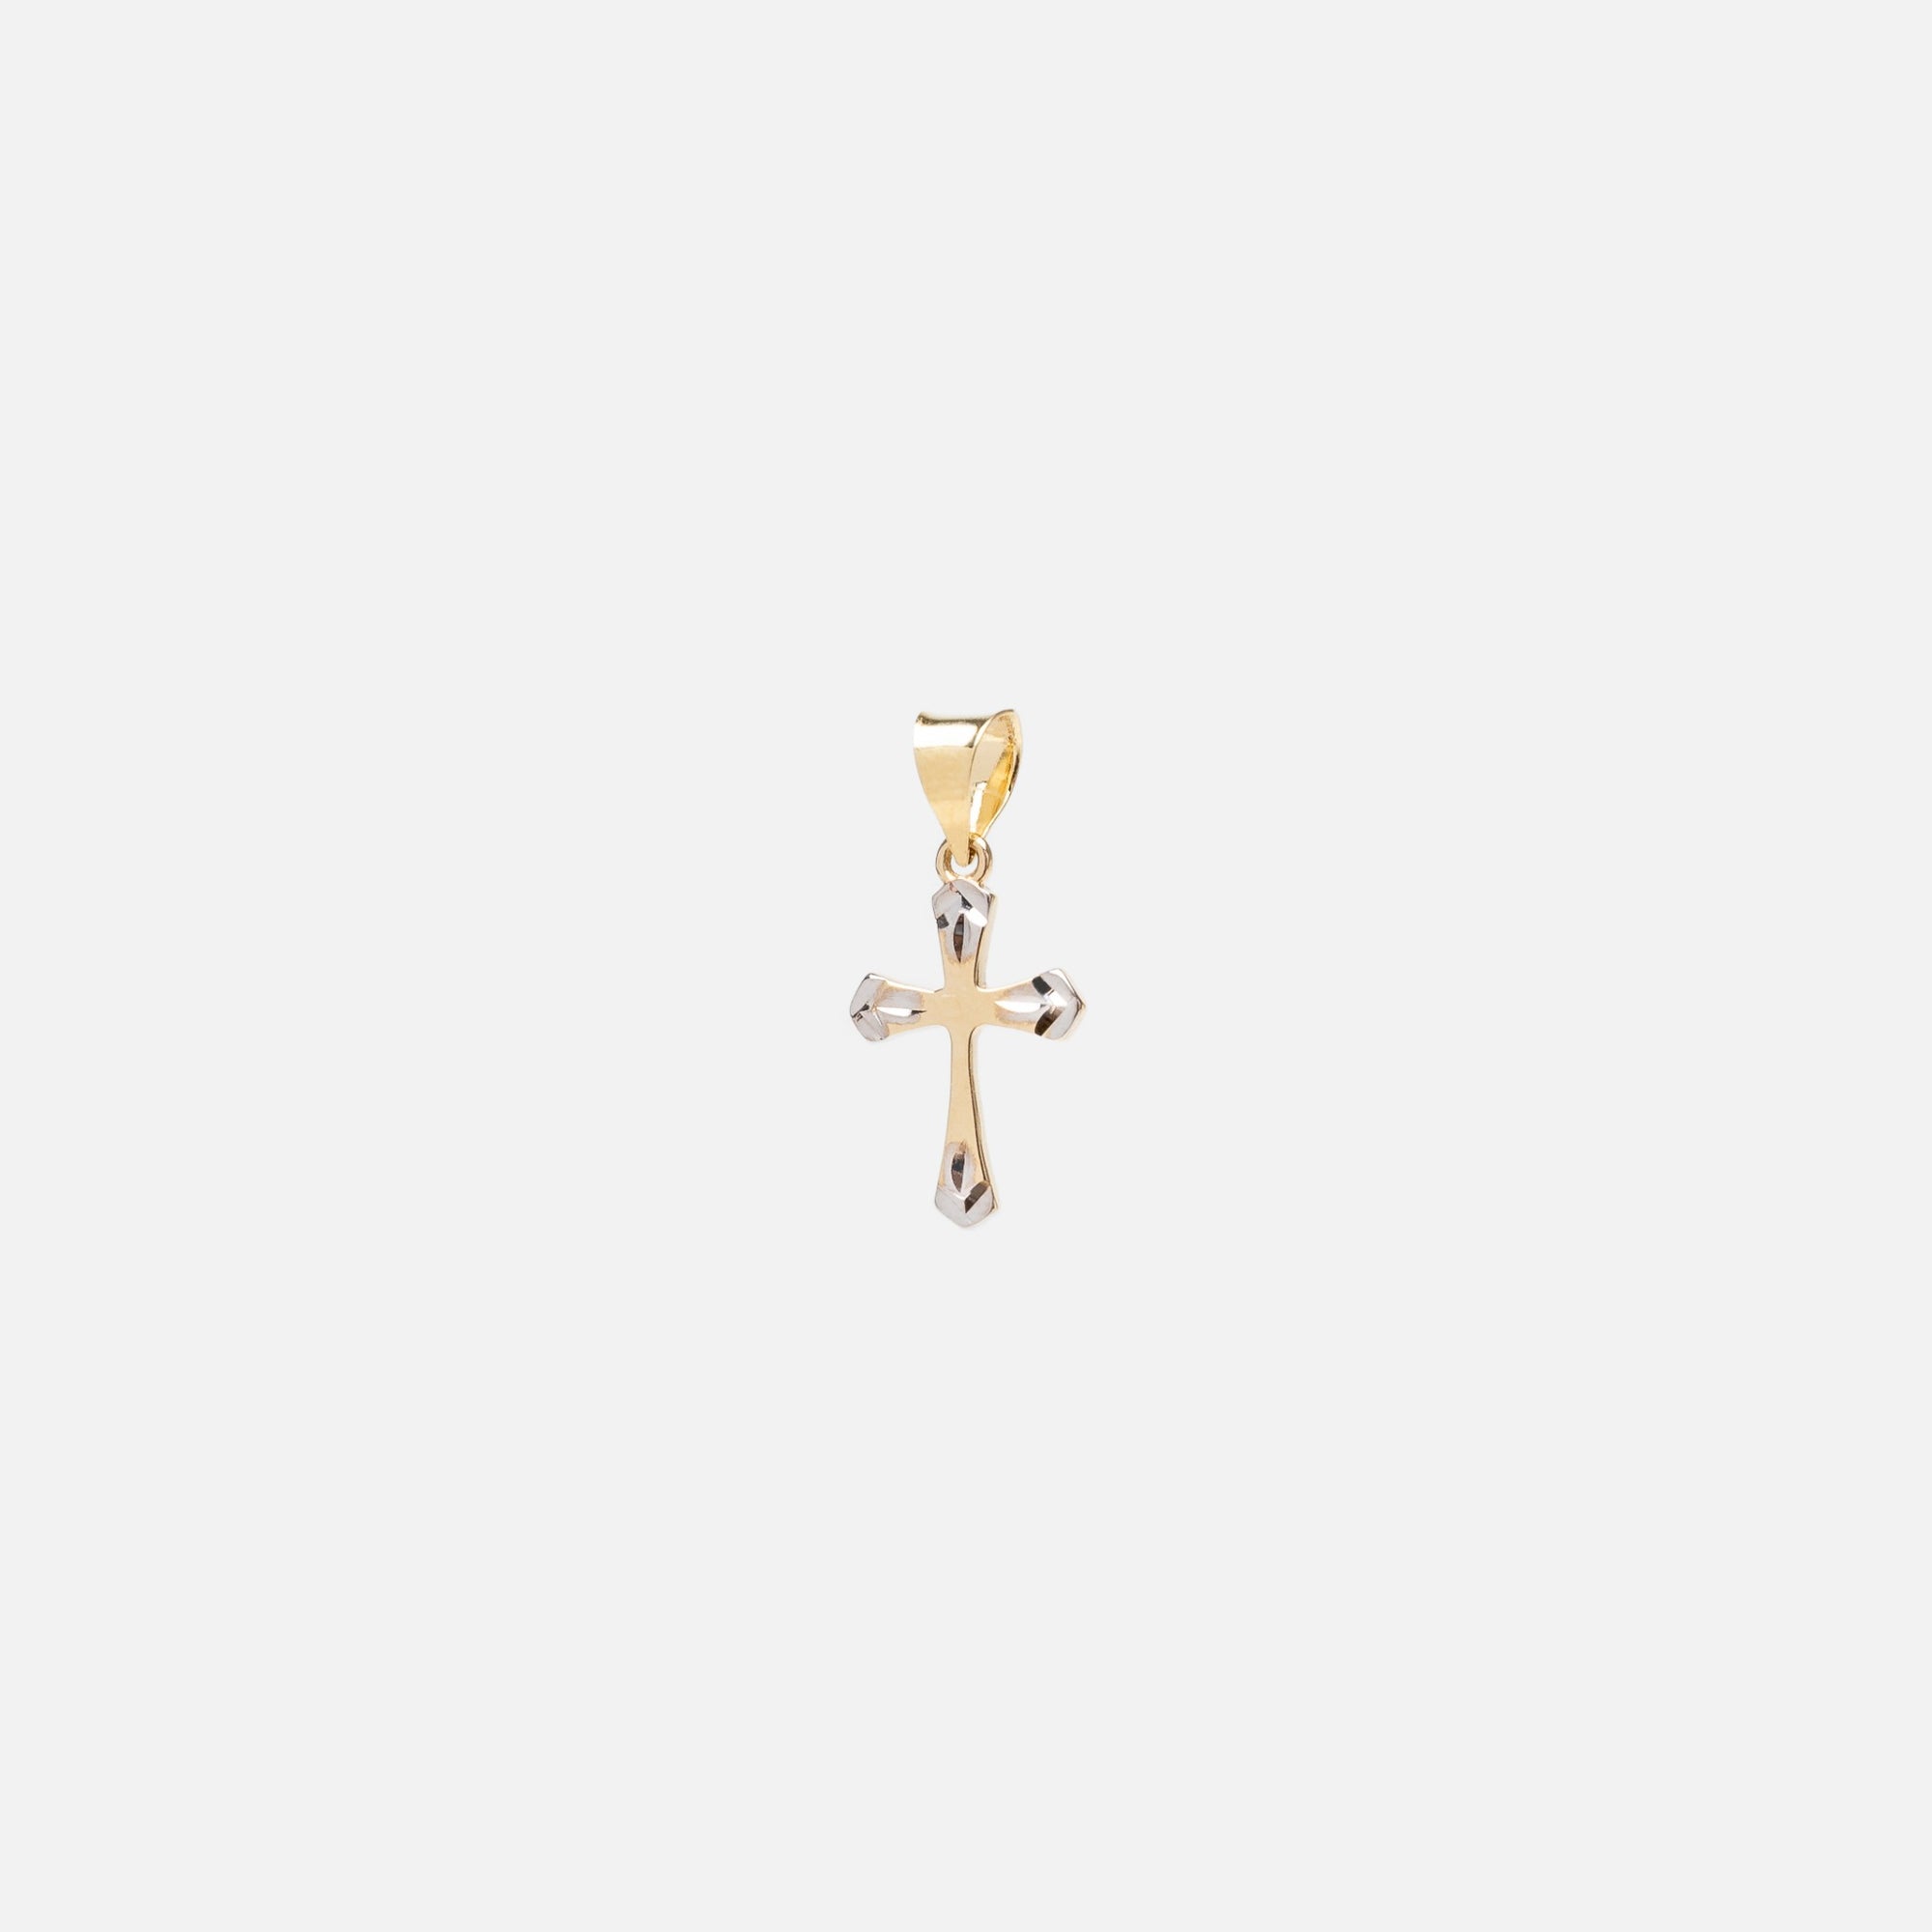 10k yellow gold cross charm with silvered details